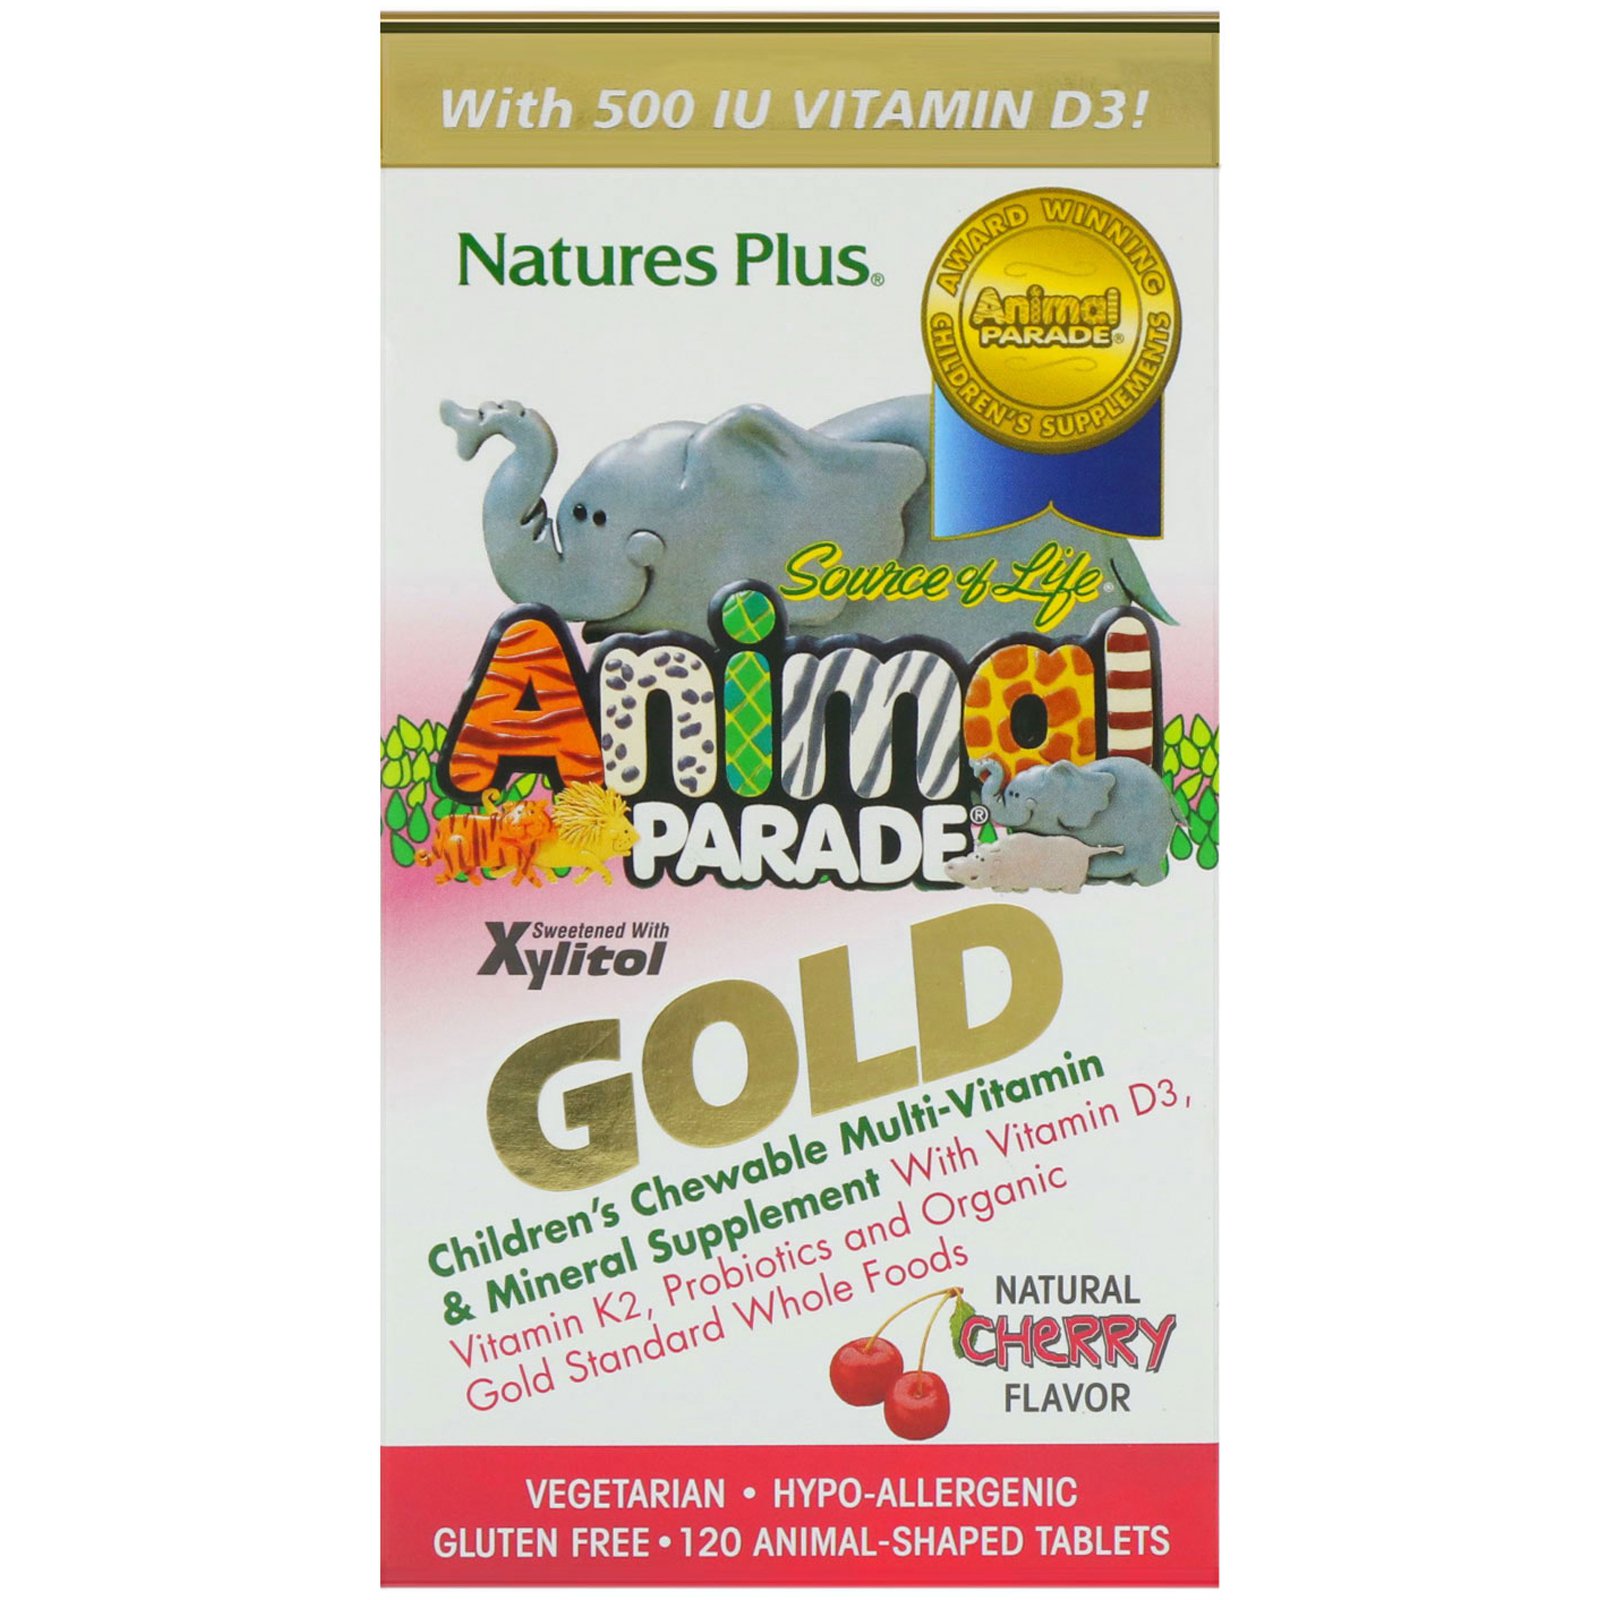 Nature's Plus, Source of Life Animal Parade Gold, Children's Chewable Multi-Vitamin &amp; Mineral Supplement, Natural Cherry Flavor, 120 Animal-Shaped Tablets